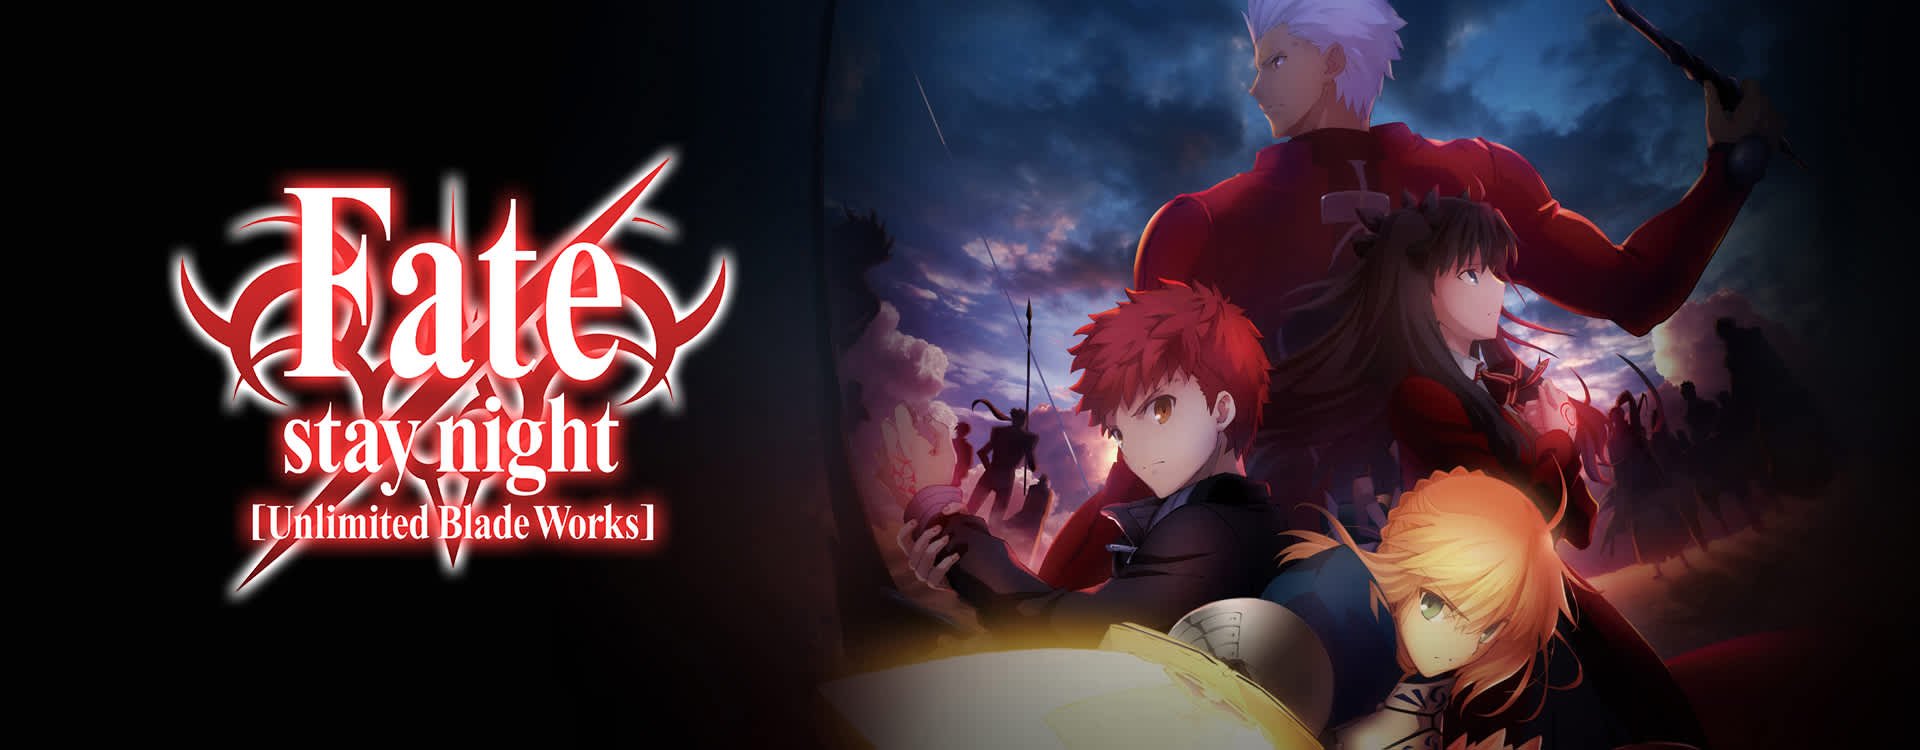 Fate Stay Night Unlimited Blade Works Fate Zero Gravitation And Junjo Romantica To Stream On Funimation Now Uk Anime Uk News